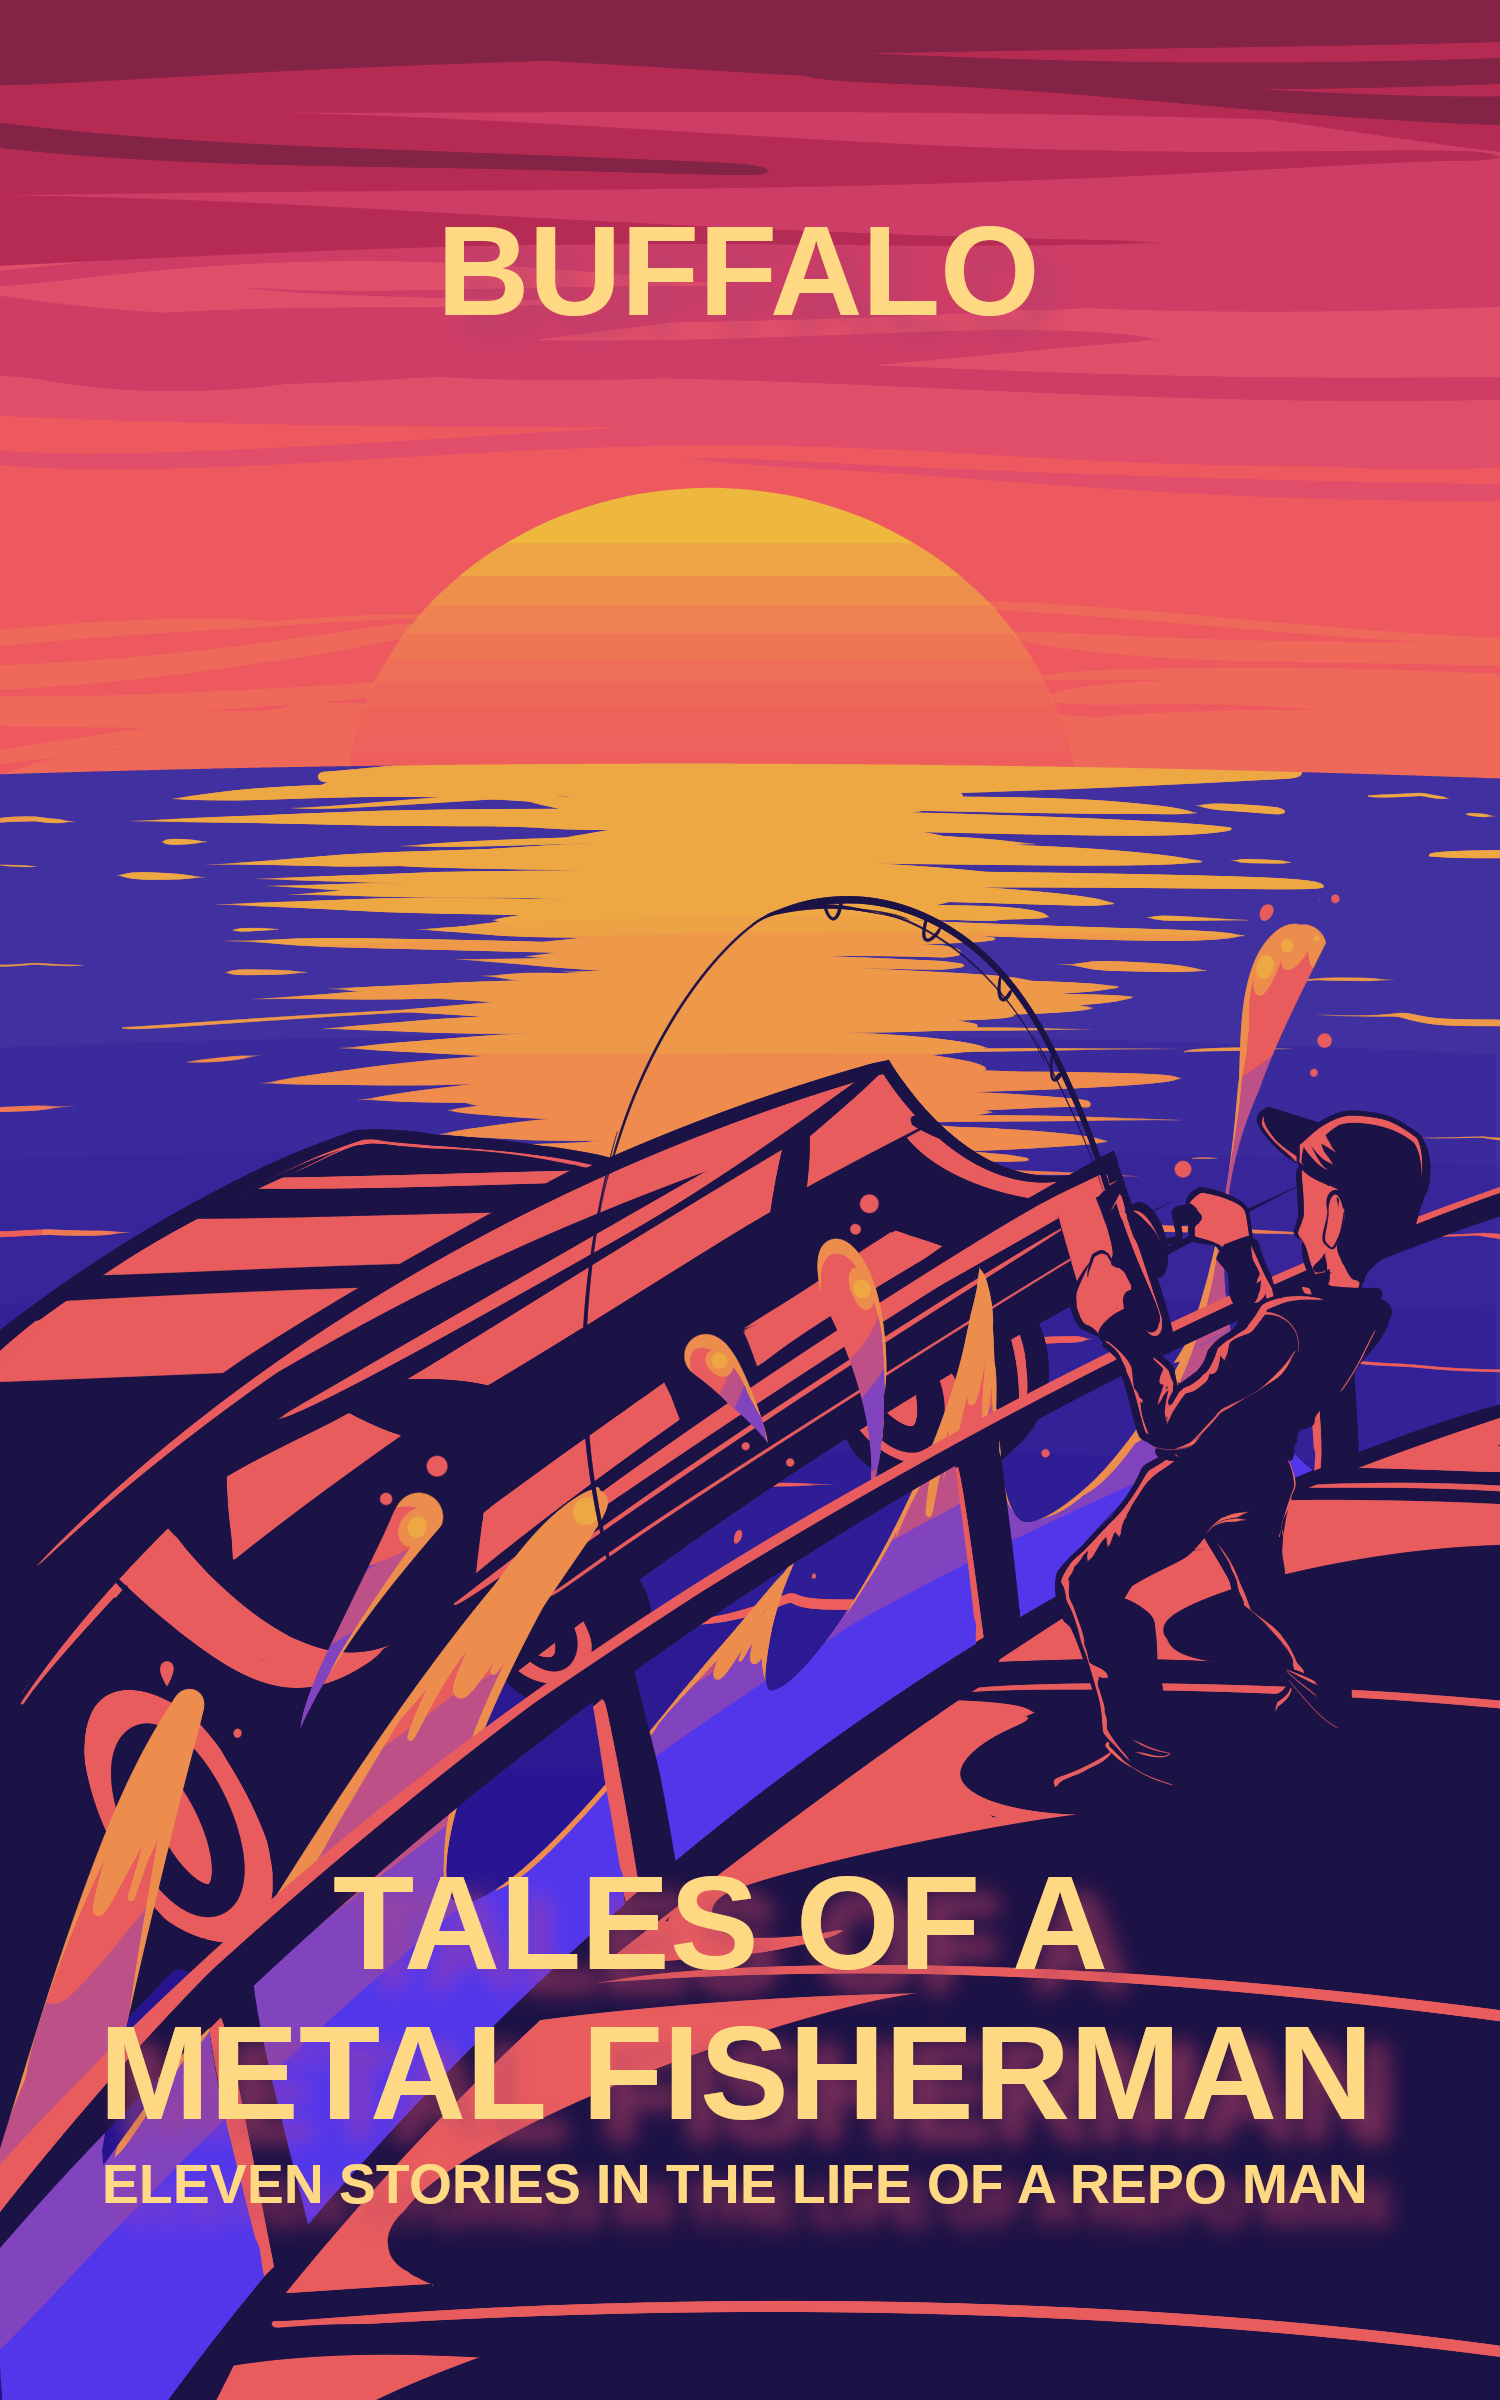 Cover illustration for the novel Tales of a Metal Fisherman by Buffalo, illustration by Chris Jacobs. The illustration shows a man on a sunset-lit pier hauling a car out the water with a fishing line.